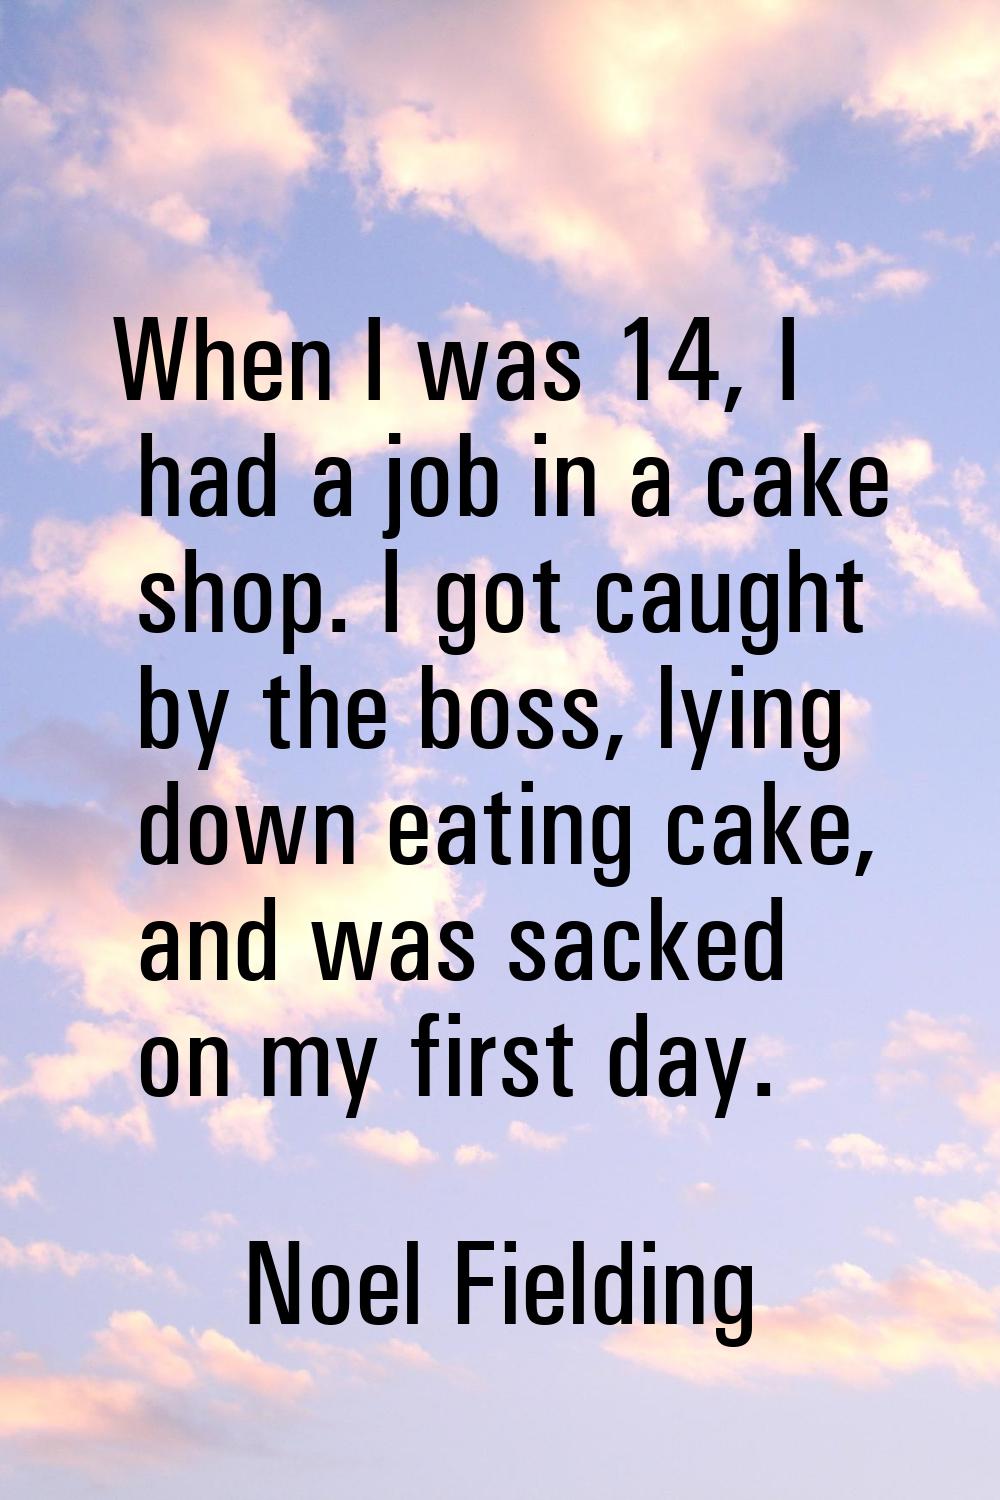 When I was 14, I had a job in a cake shop. I got caught by the boss, lying down eating cake, and wa